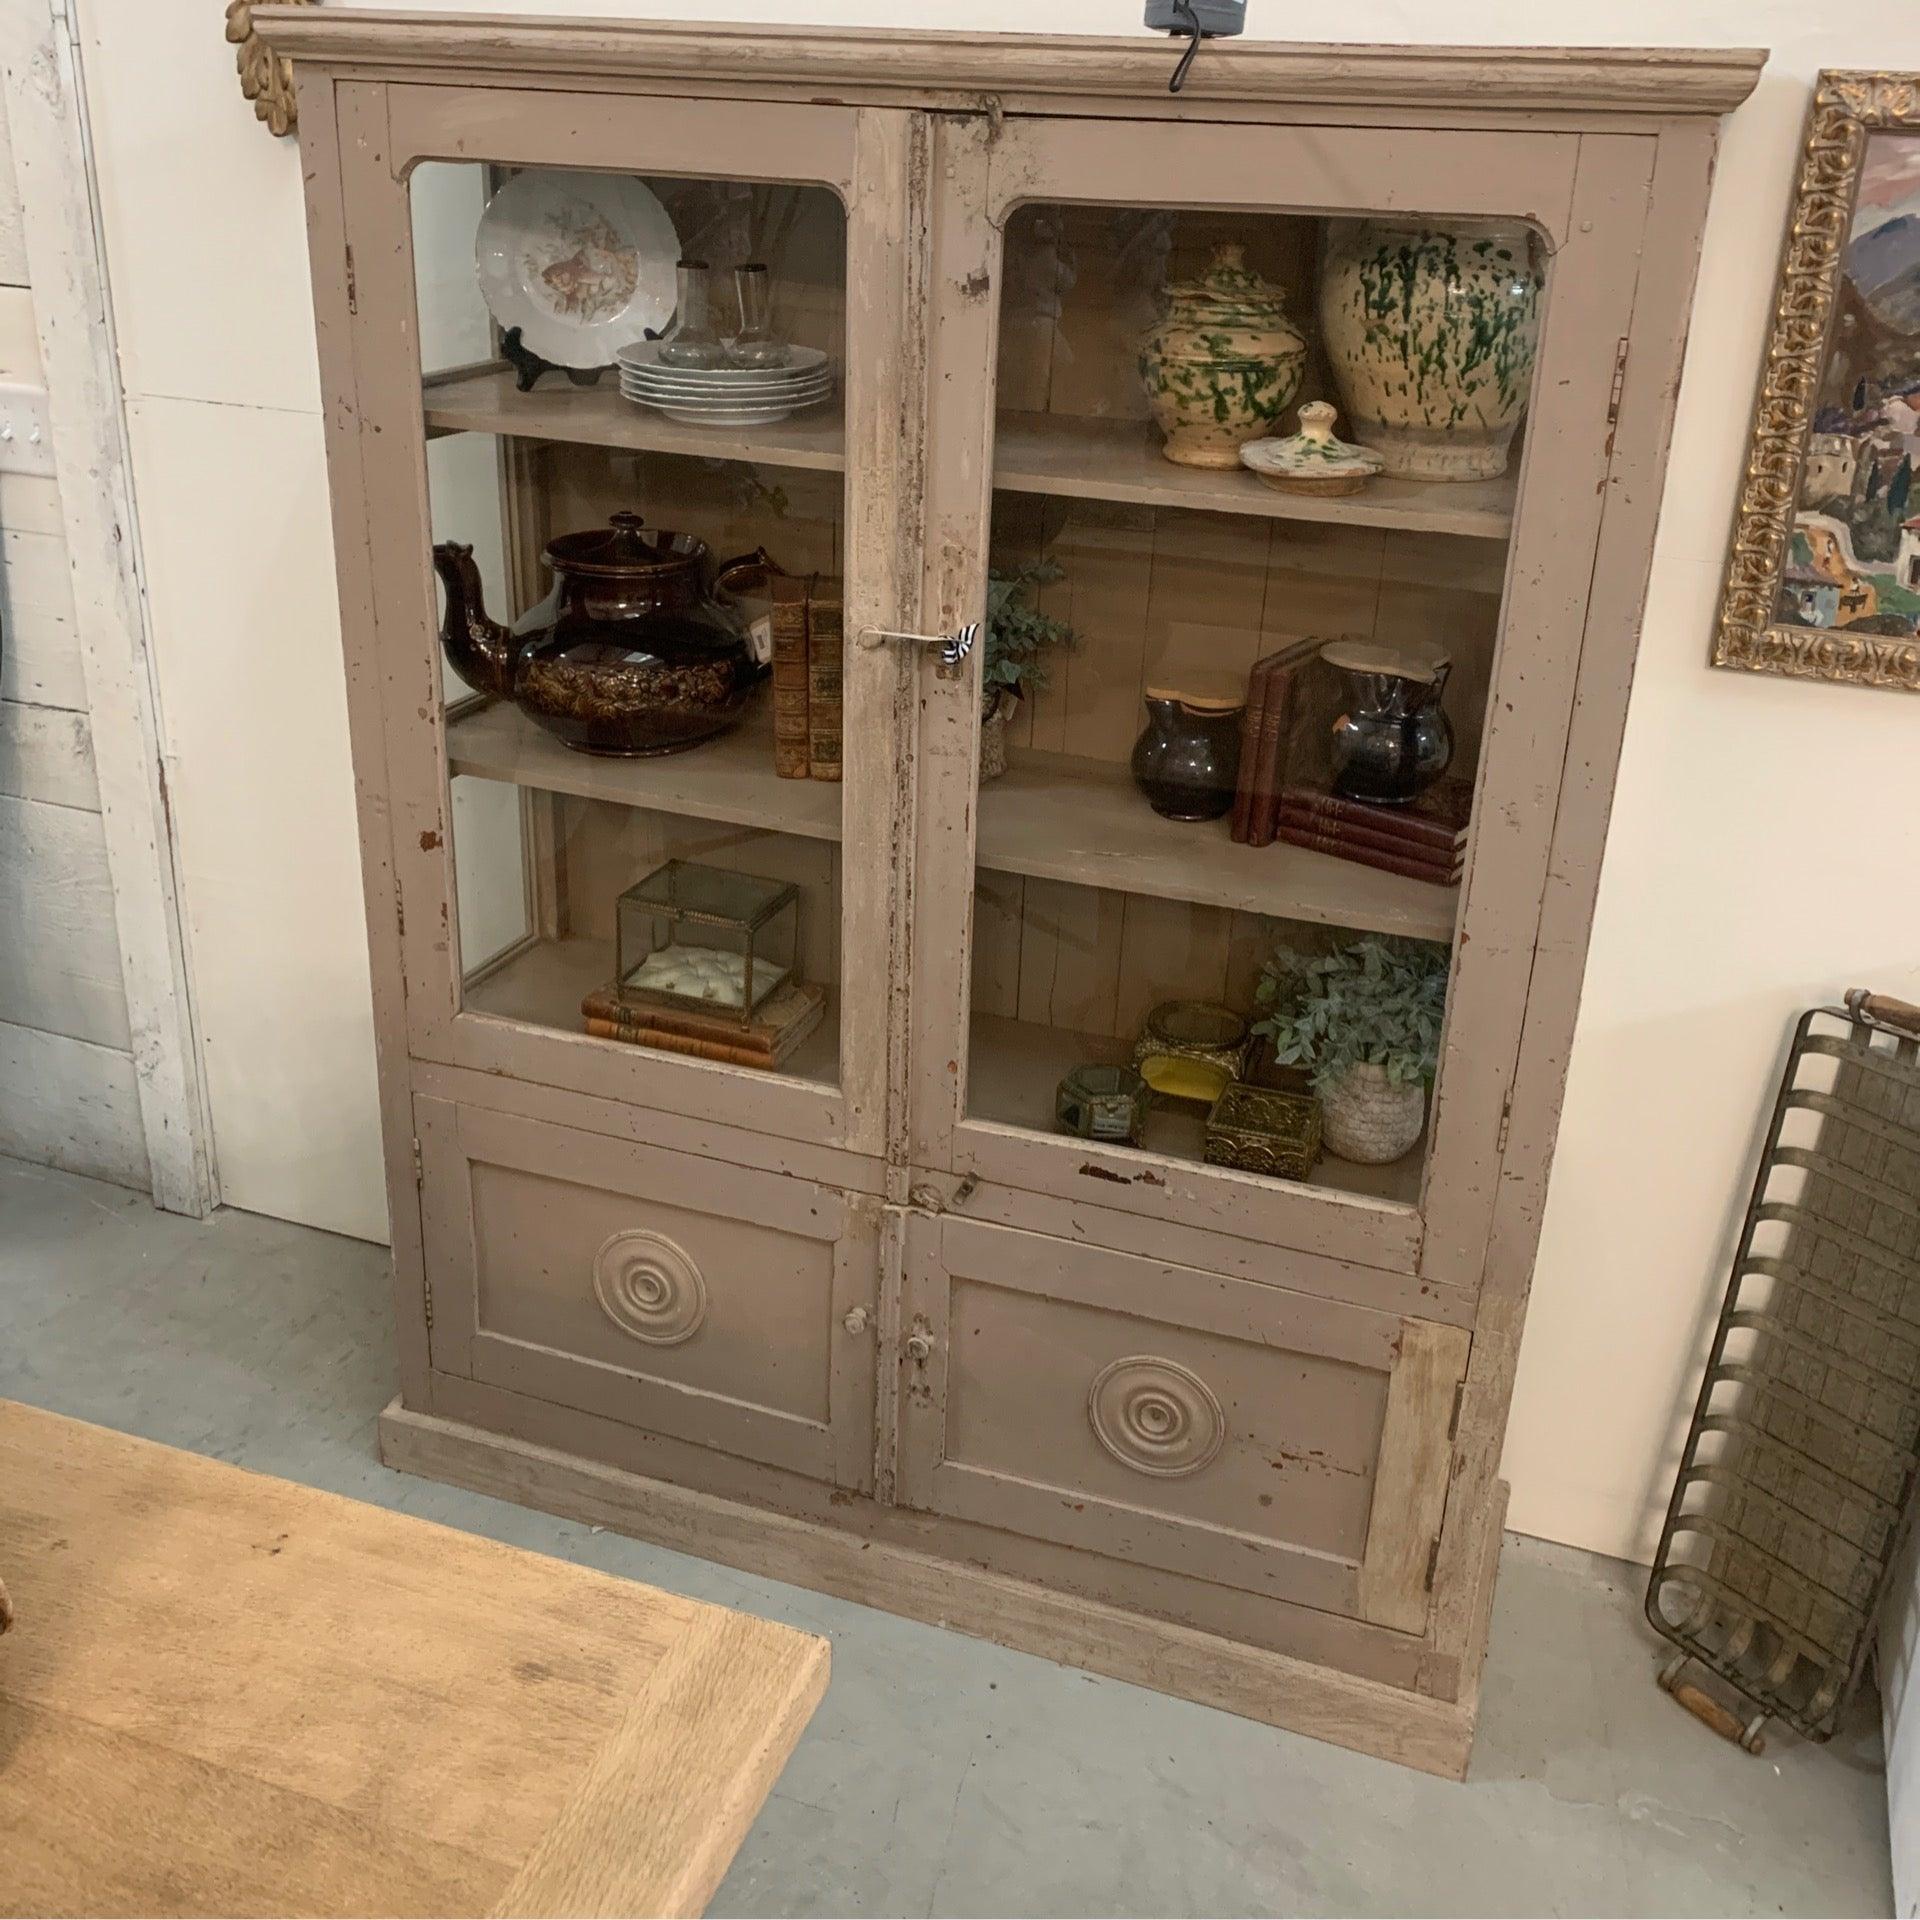 Vintage French Beige Display Case With 2 Glass Doors - The White Barn Antiques